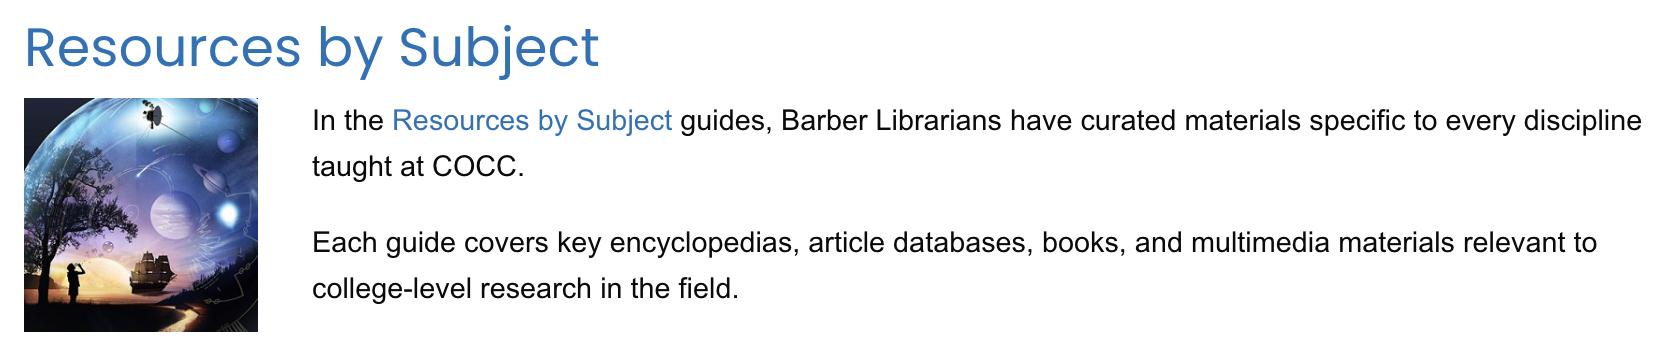 The link to Resources by Subject, which is guides with curated materials specific to every discipline taught at COCC. Each guide covers key encyclopedias, article databases, books, and multimedia materials relevant to college-level research in the field.